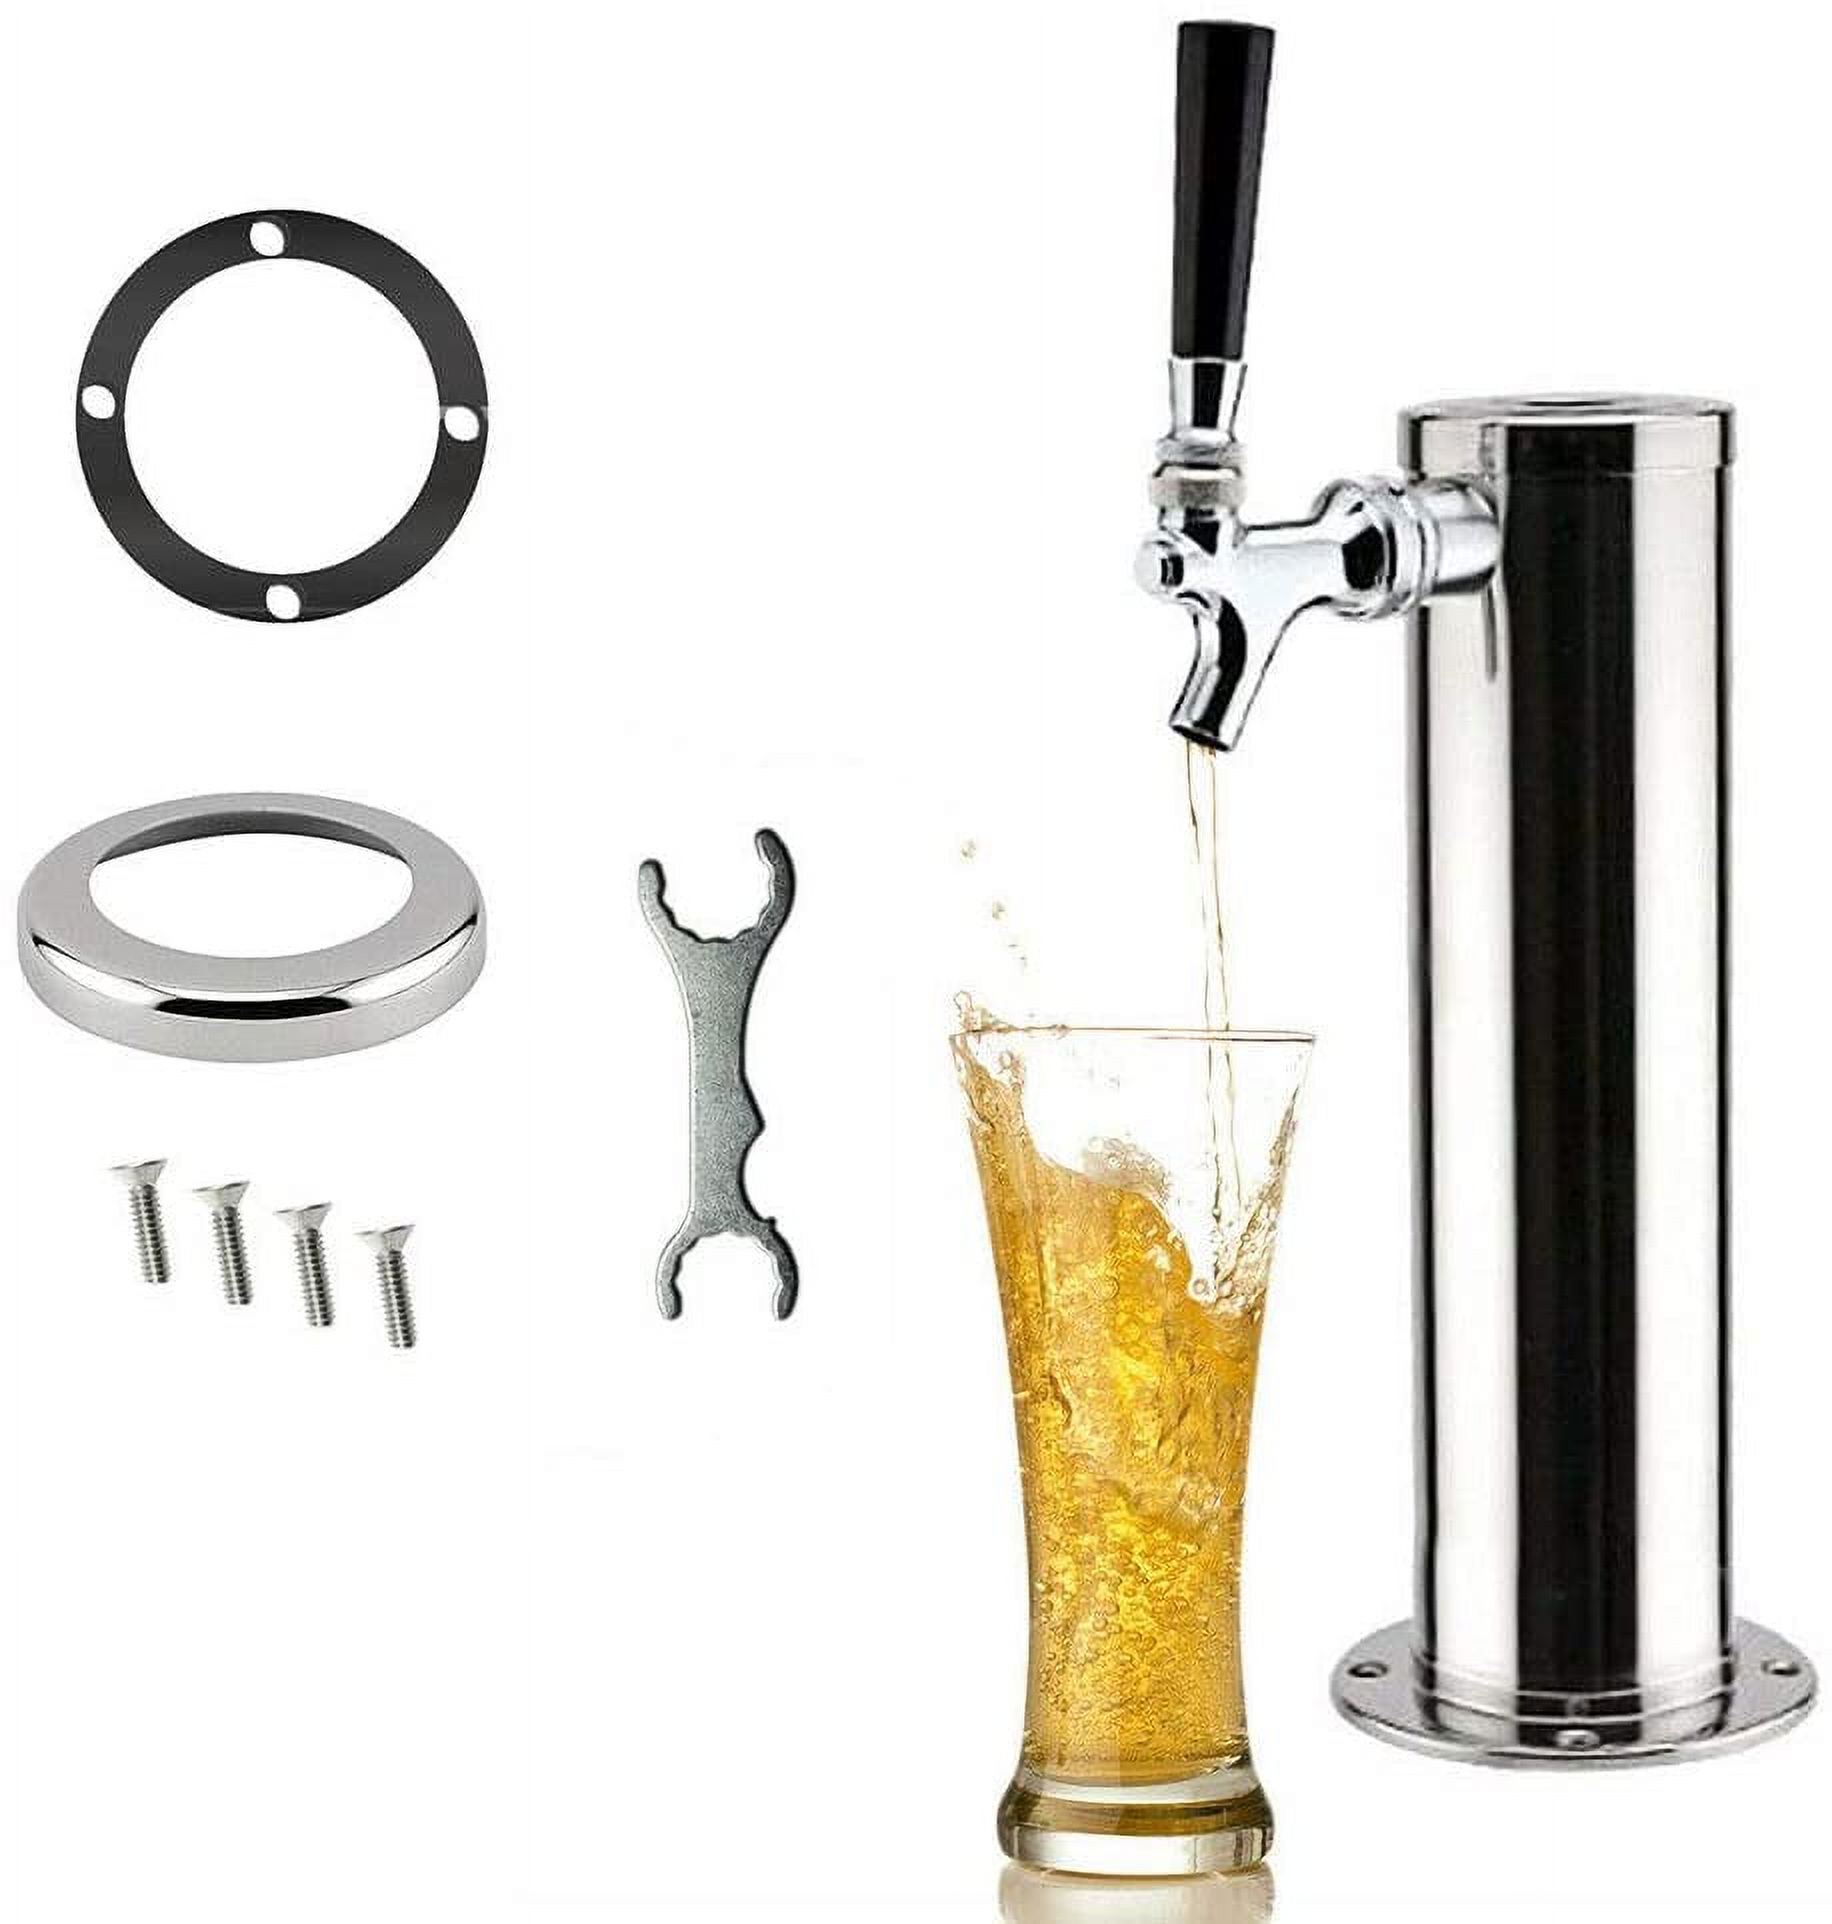 Stainless Steel Single Faucet Tap Draft Beer Kegerator Tower Beer Dispenser for Bar Home Brewing, 3-Inch Column Silver (Sing Tap) - image 2 of 6